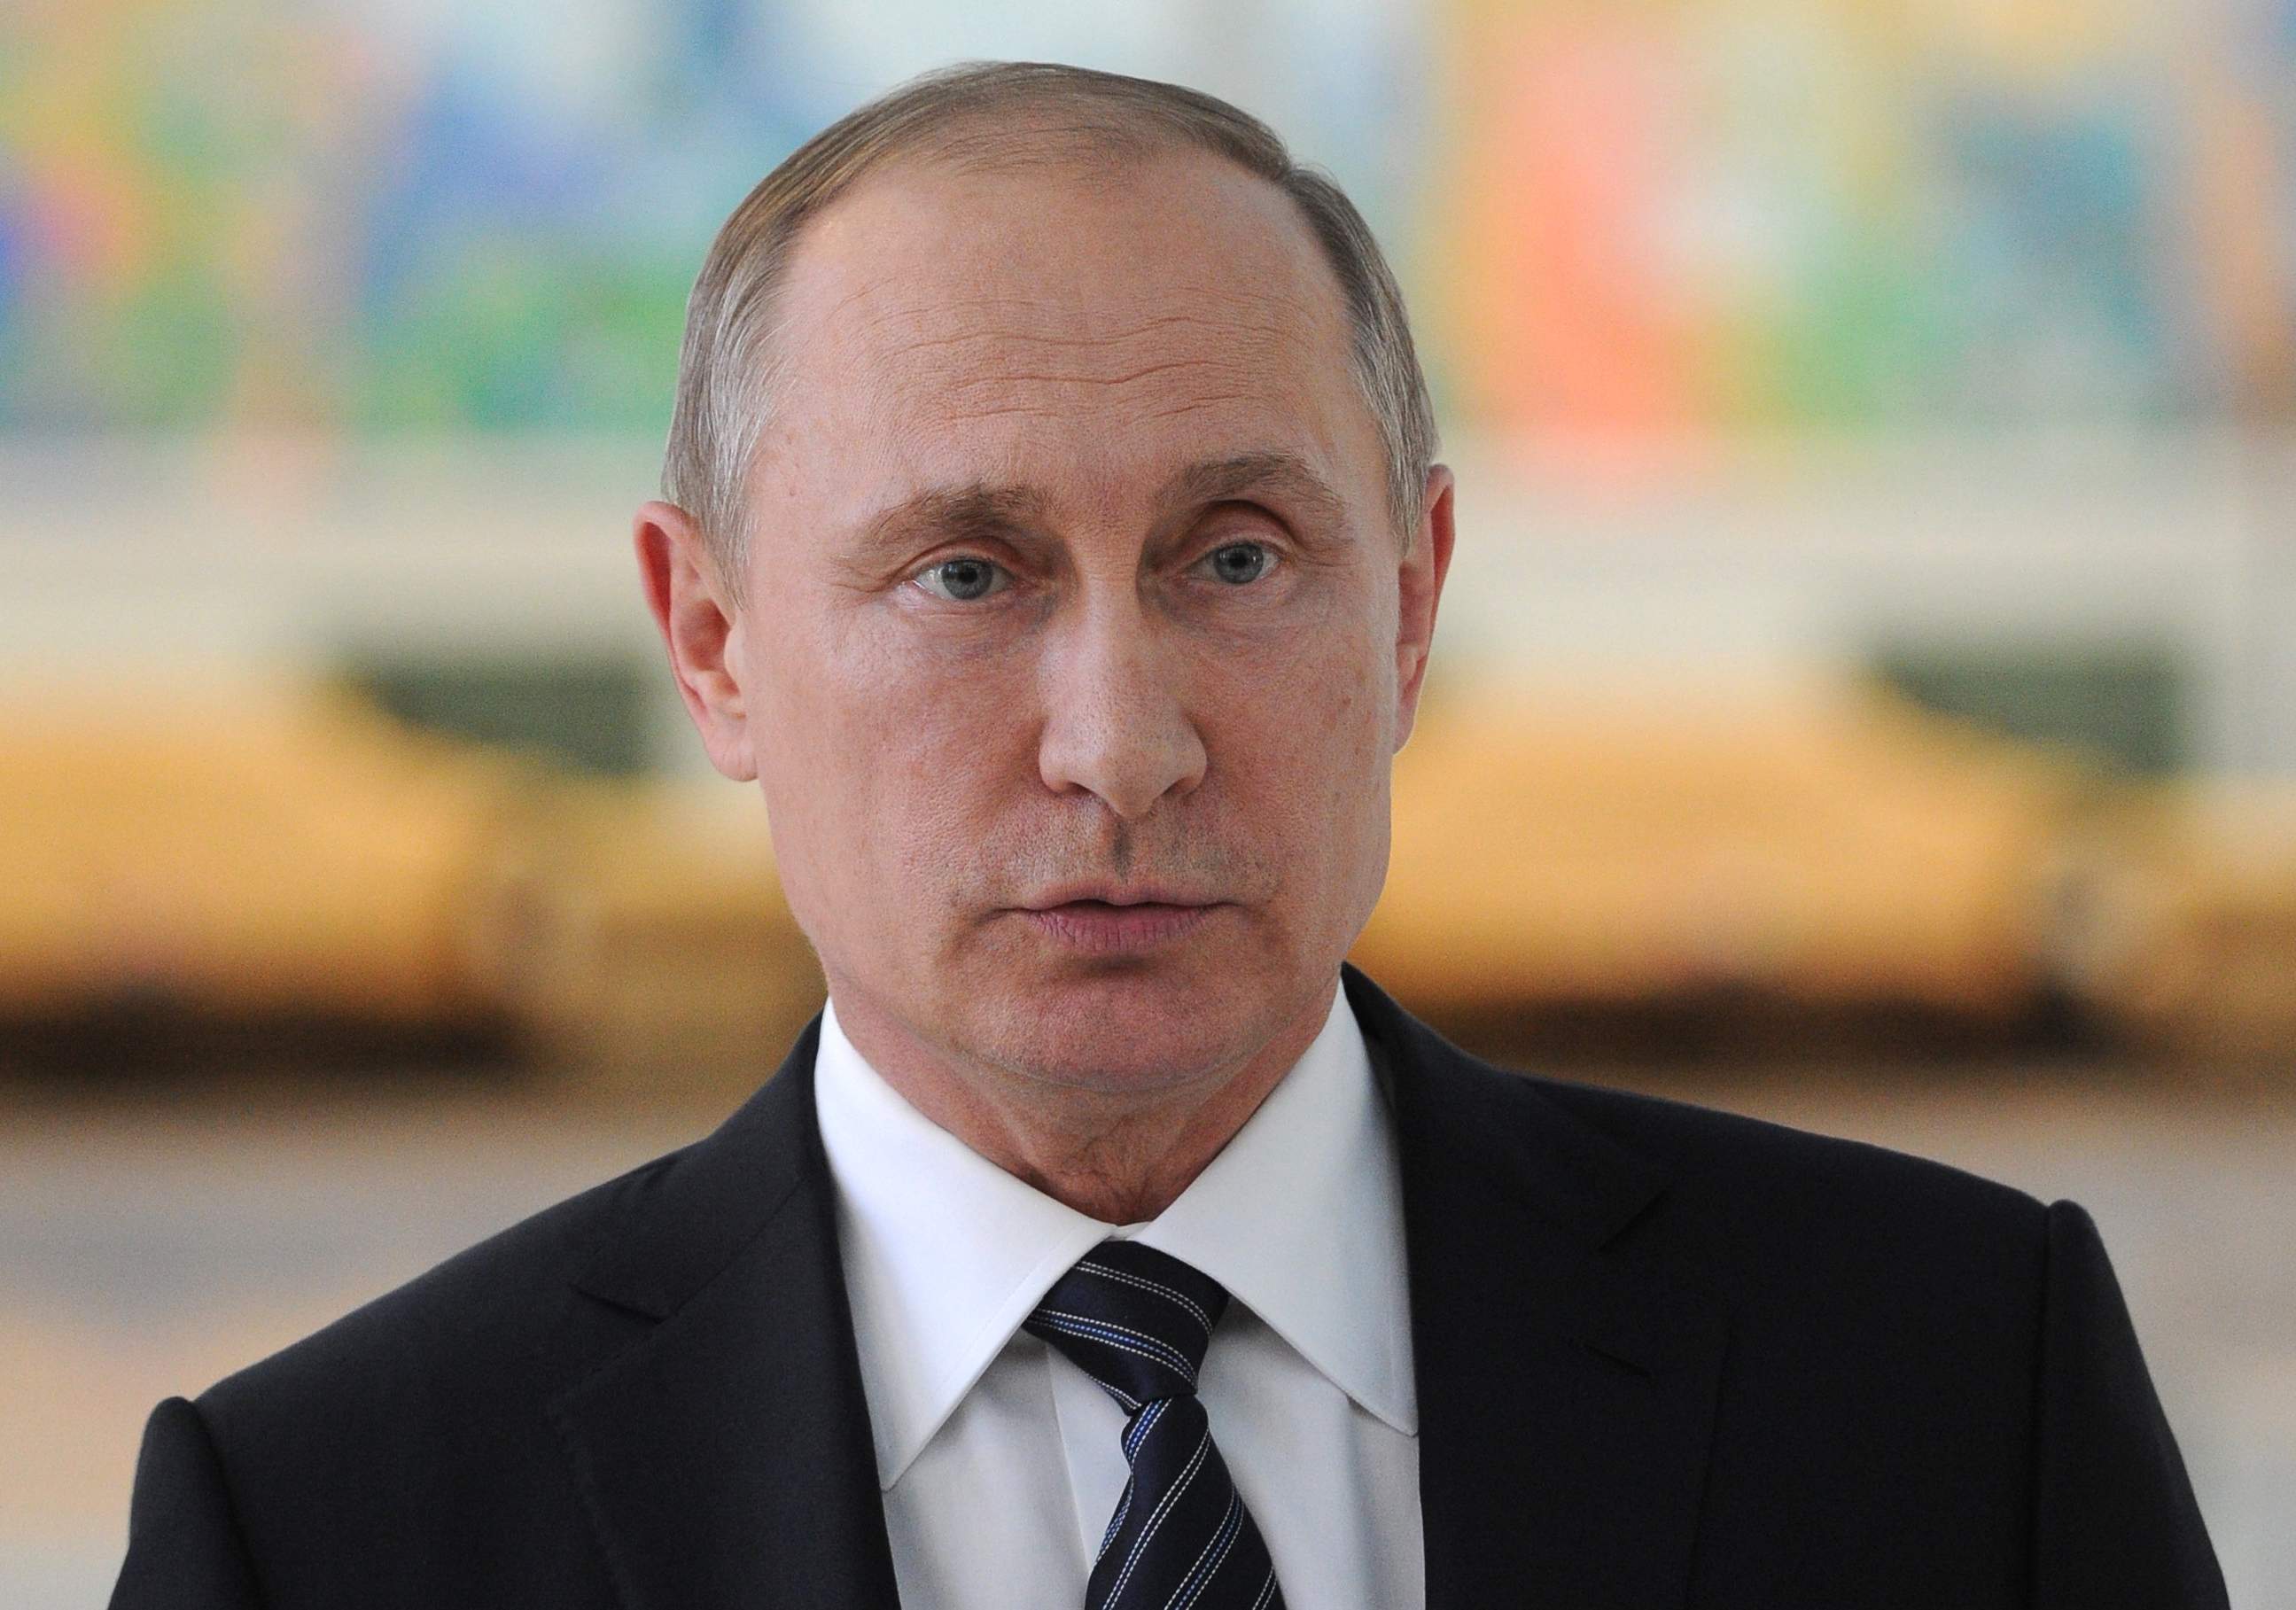 Putin undecided whether to run as an independent or not